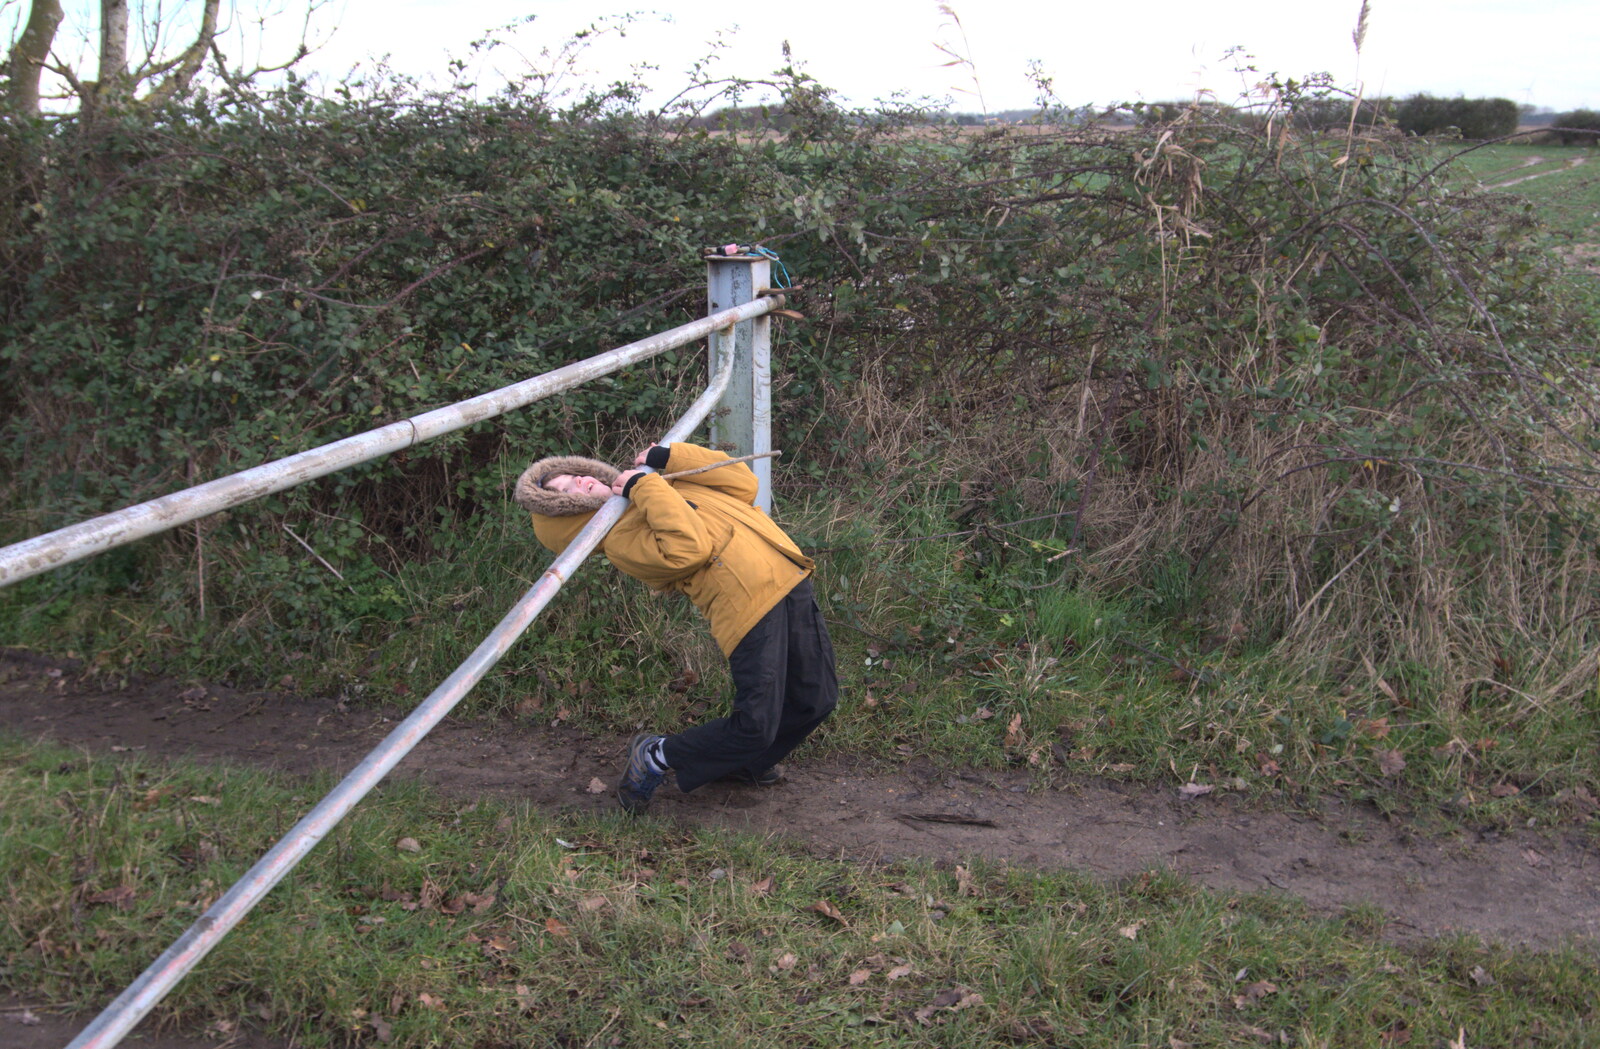 Fred gets stuck trying to limbo under a gate from To See the Seals, Horsey Gap, Norfolk - 10th January 2020